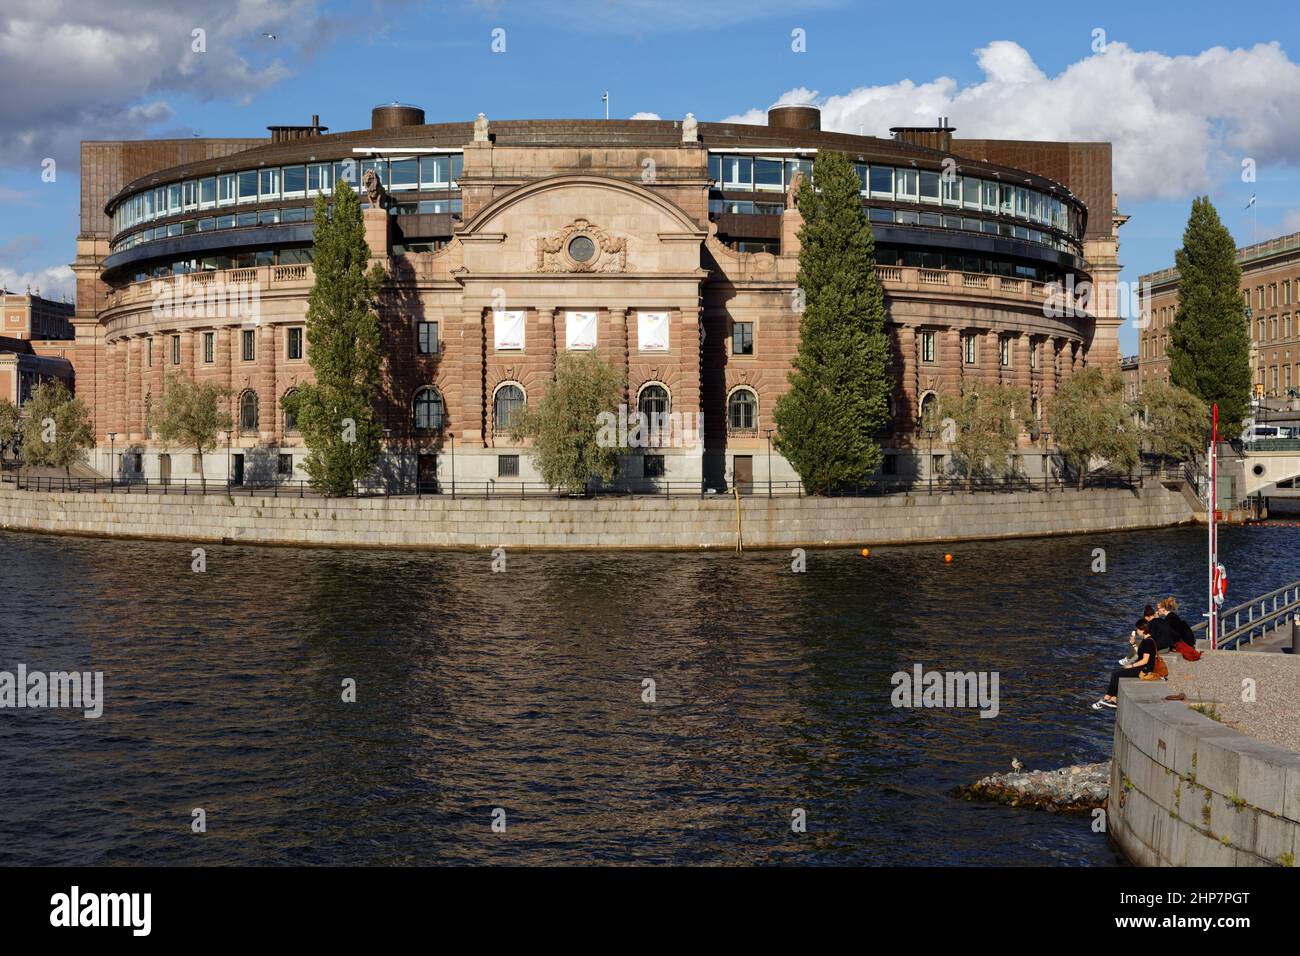 Western building of Swedish Parliament  (Riksdag) house, the Assembly Hall, on the waterfront of Helgeandsholmen island in Stockholm, Sweden Stock Photo